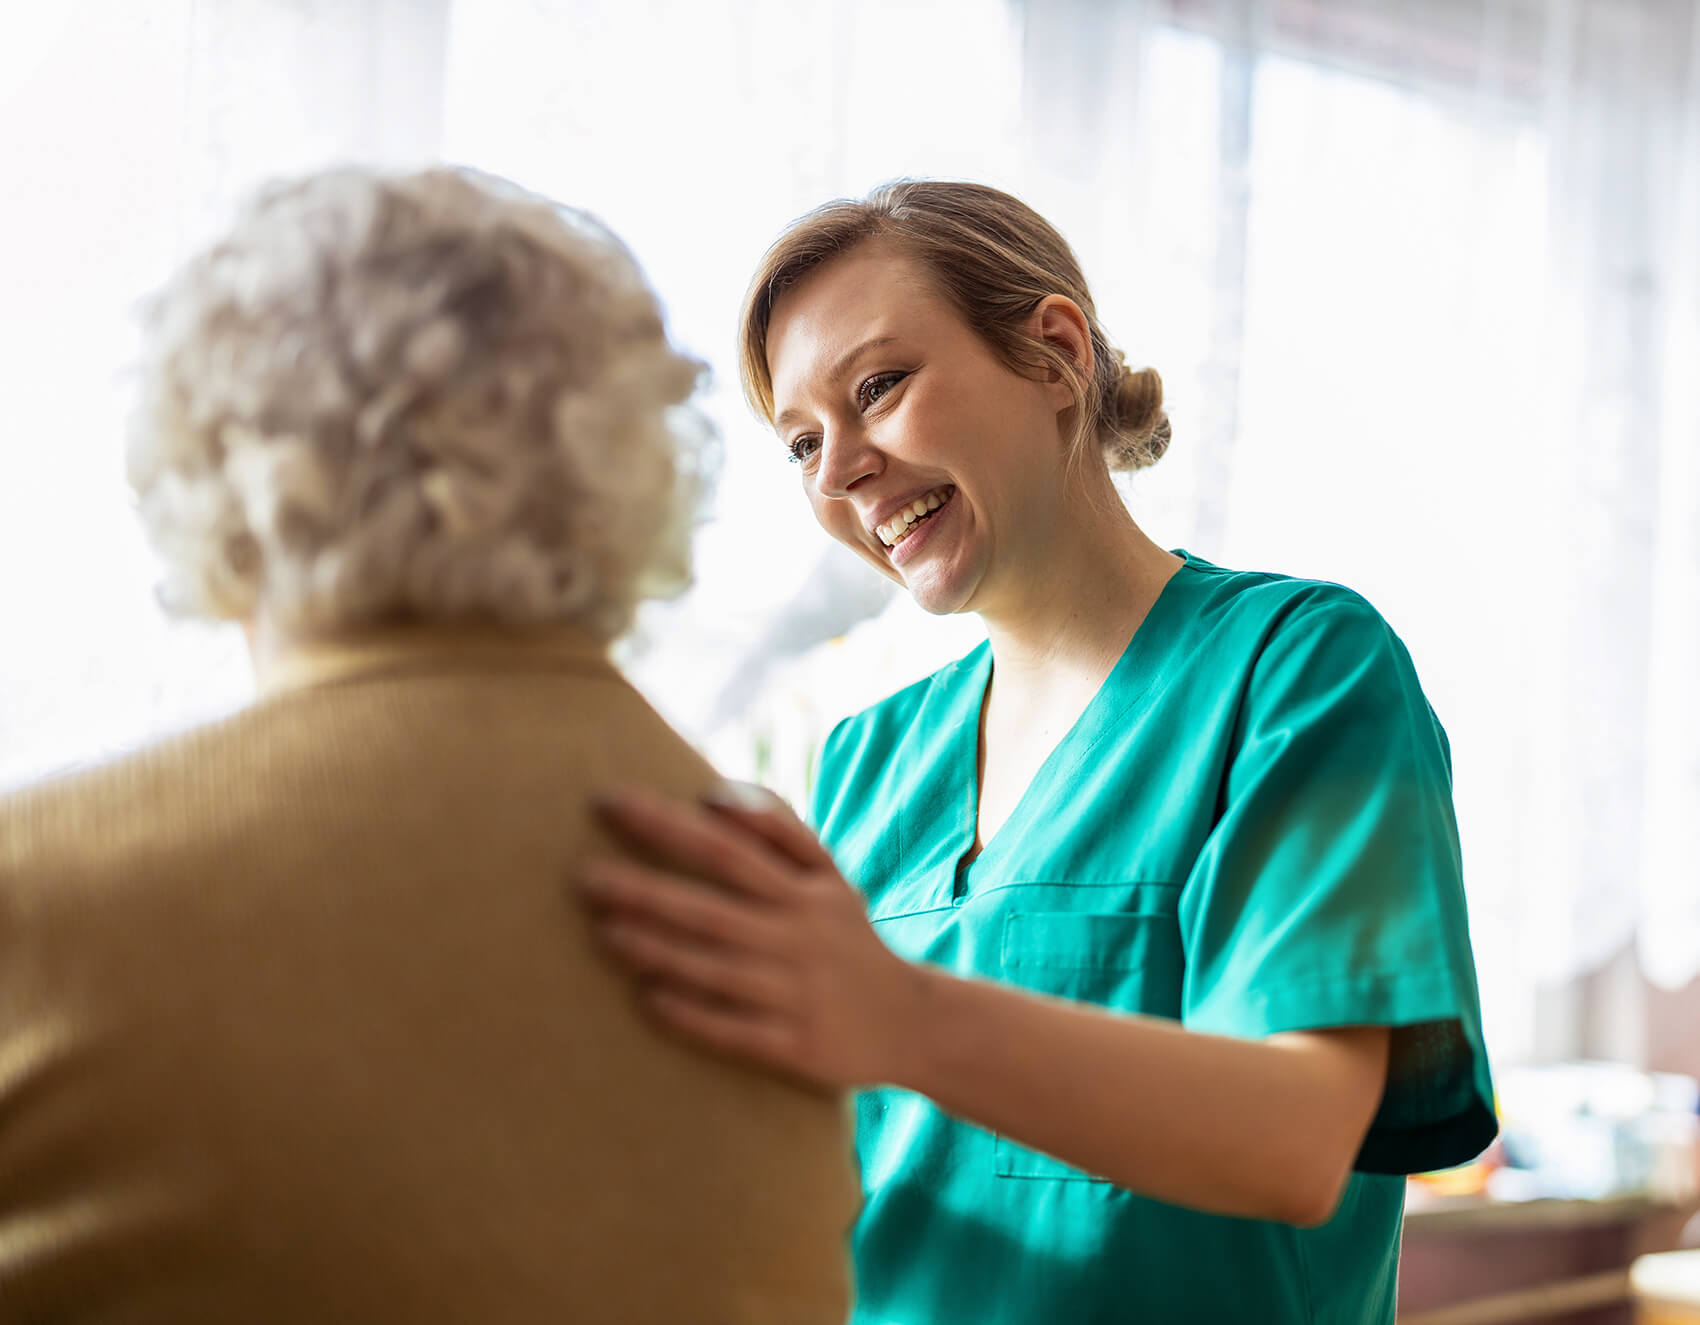 Young carer smiles at elderly patient